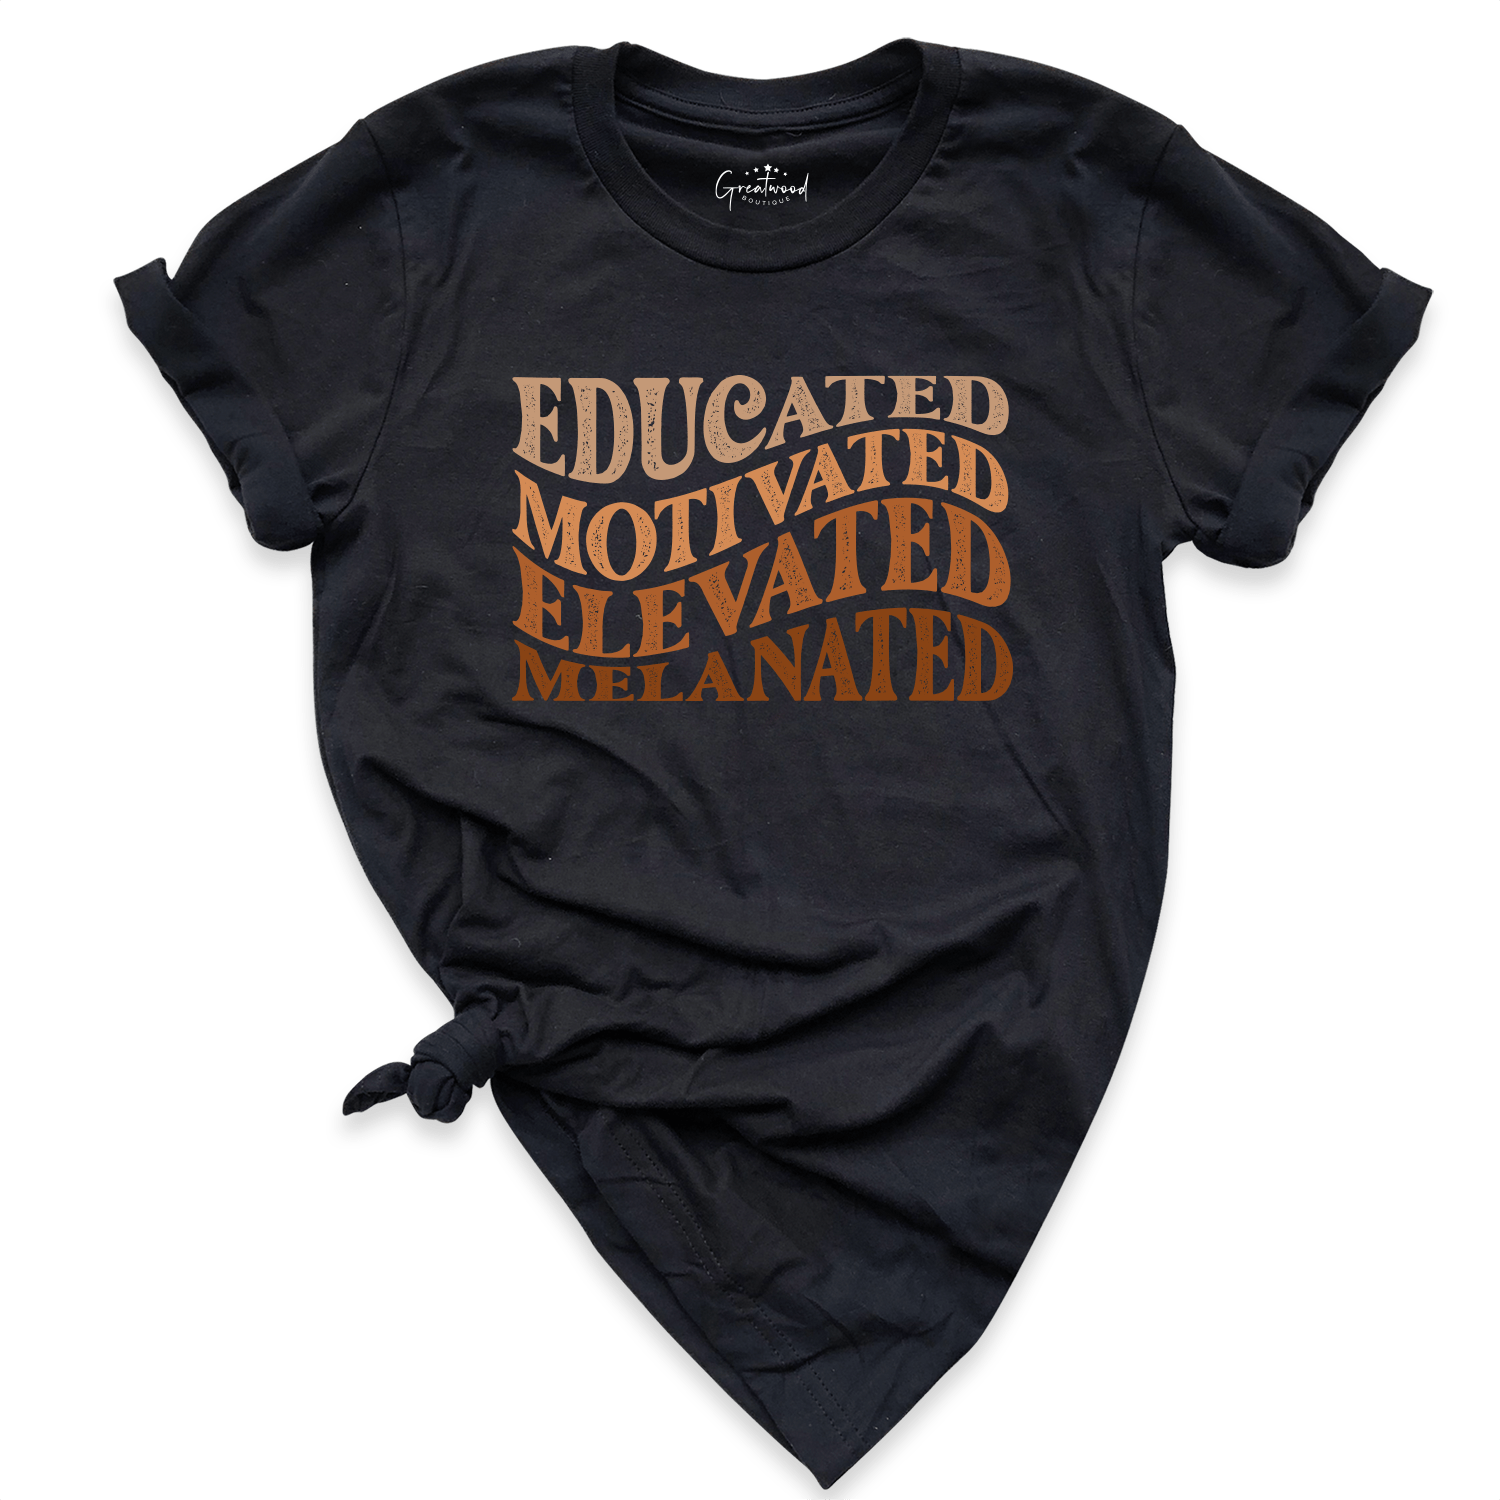 Educated Motivated Elevated Melanated Shirt Black - Greatwood Boutique